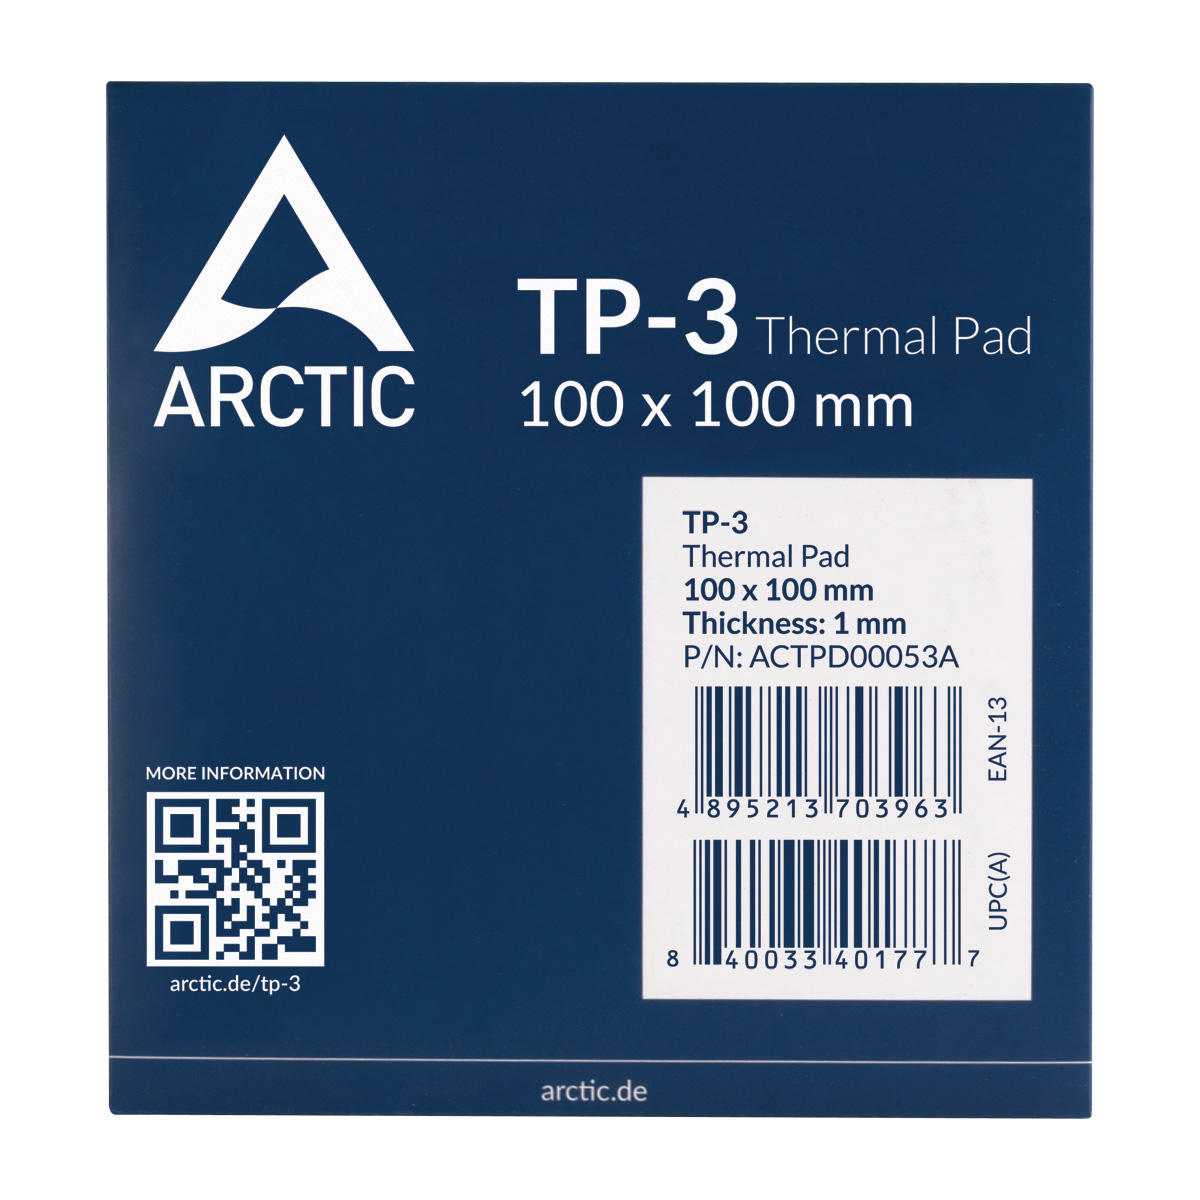 TP-3_100x100mm_1mm_Packaging